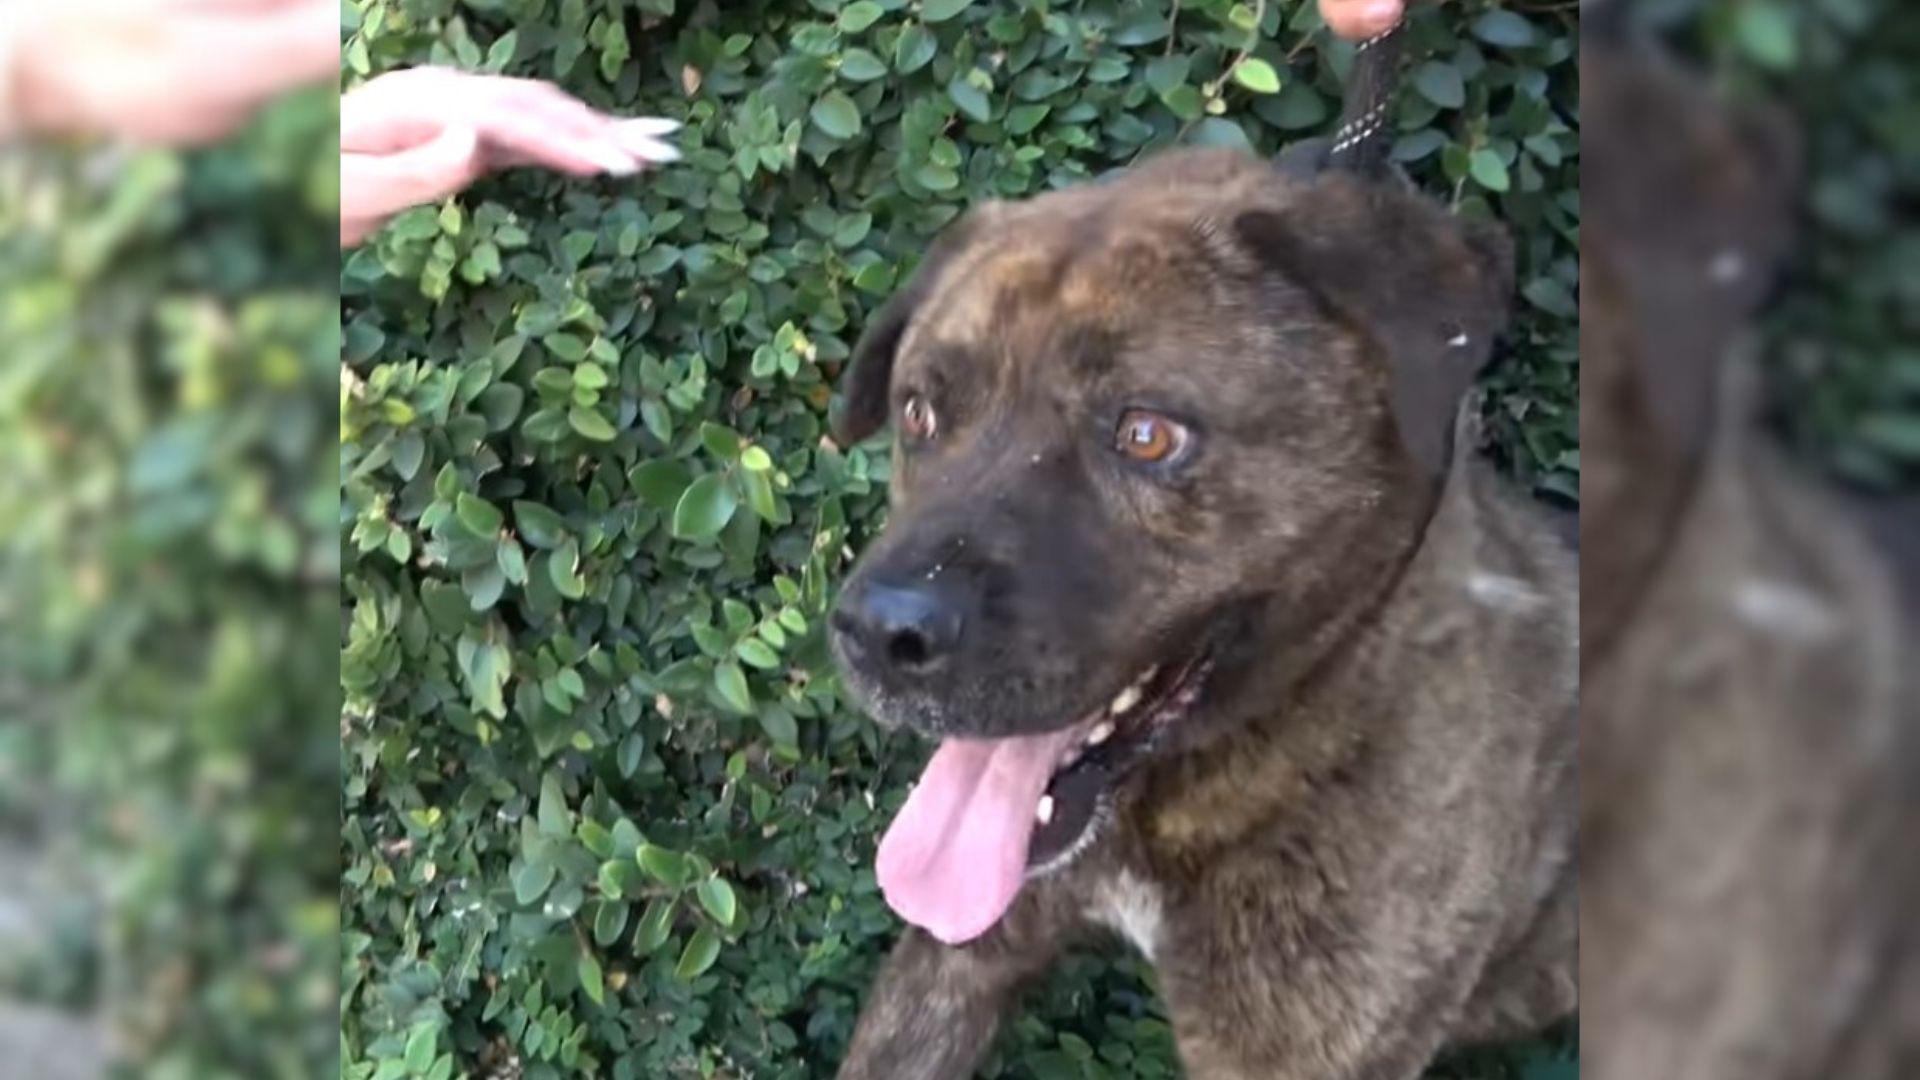 This Senior Dog Was Abandoned By His Owner And Left To Starve Until His Amazing Rescuers Came